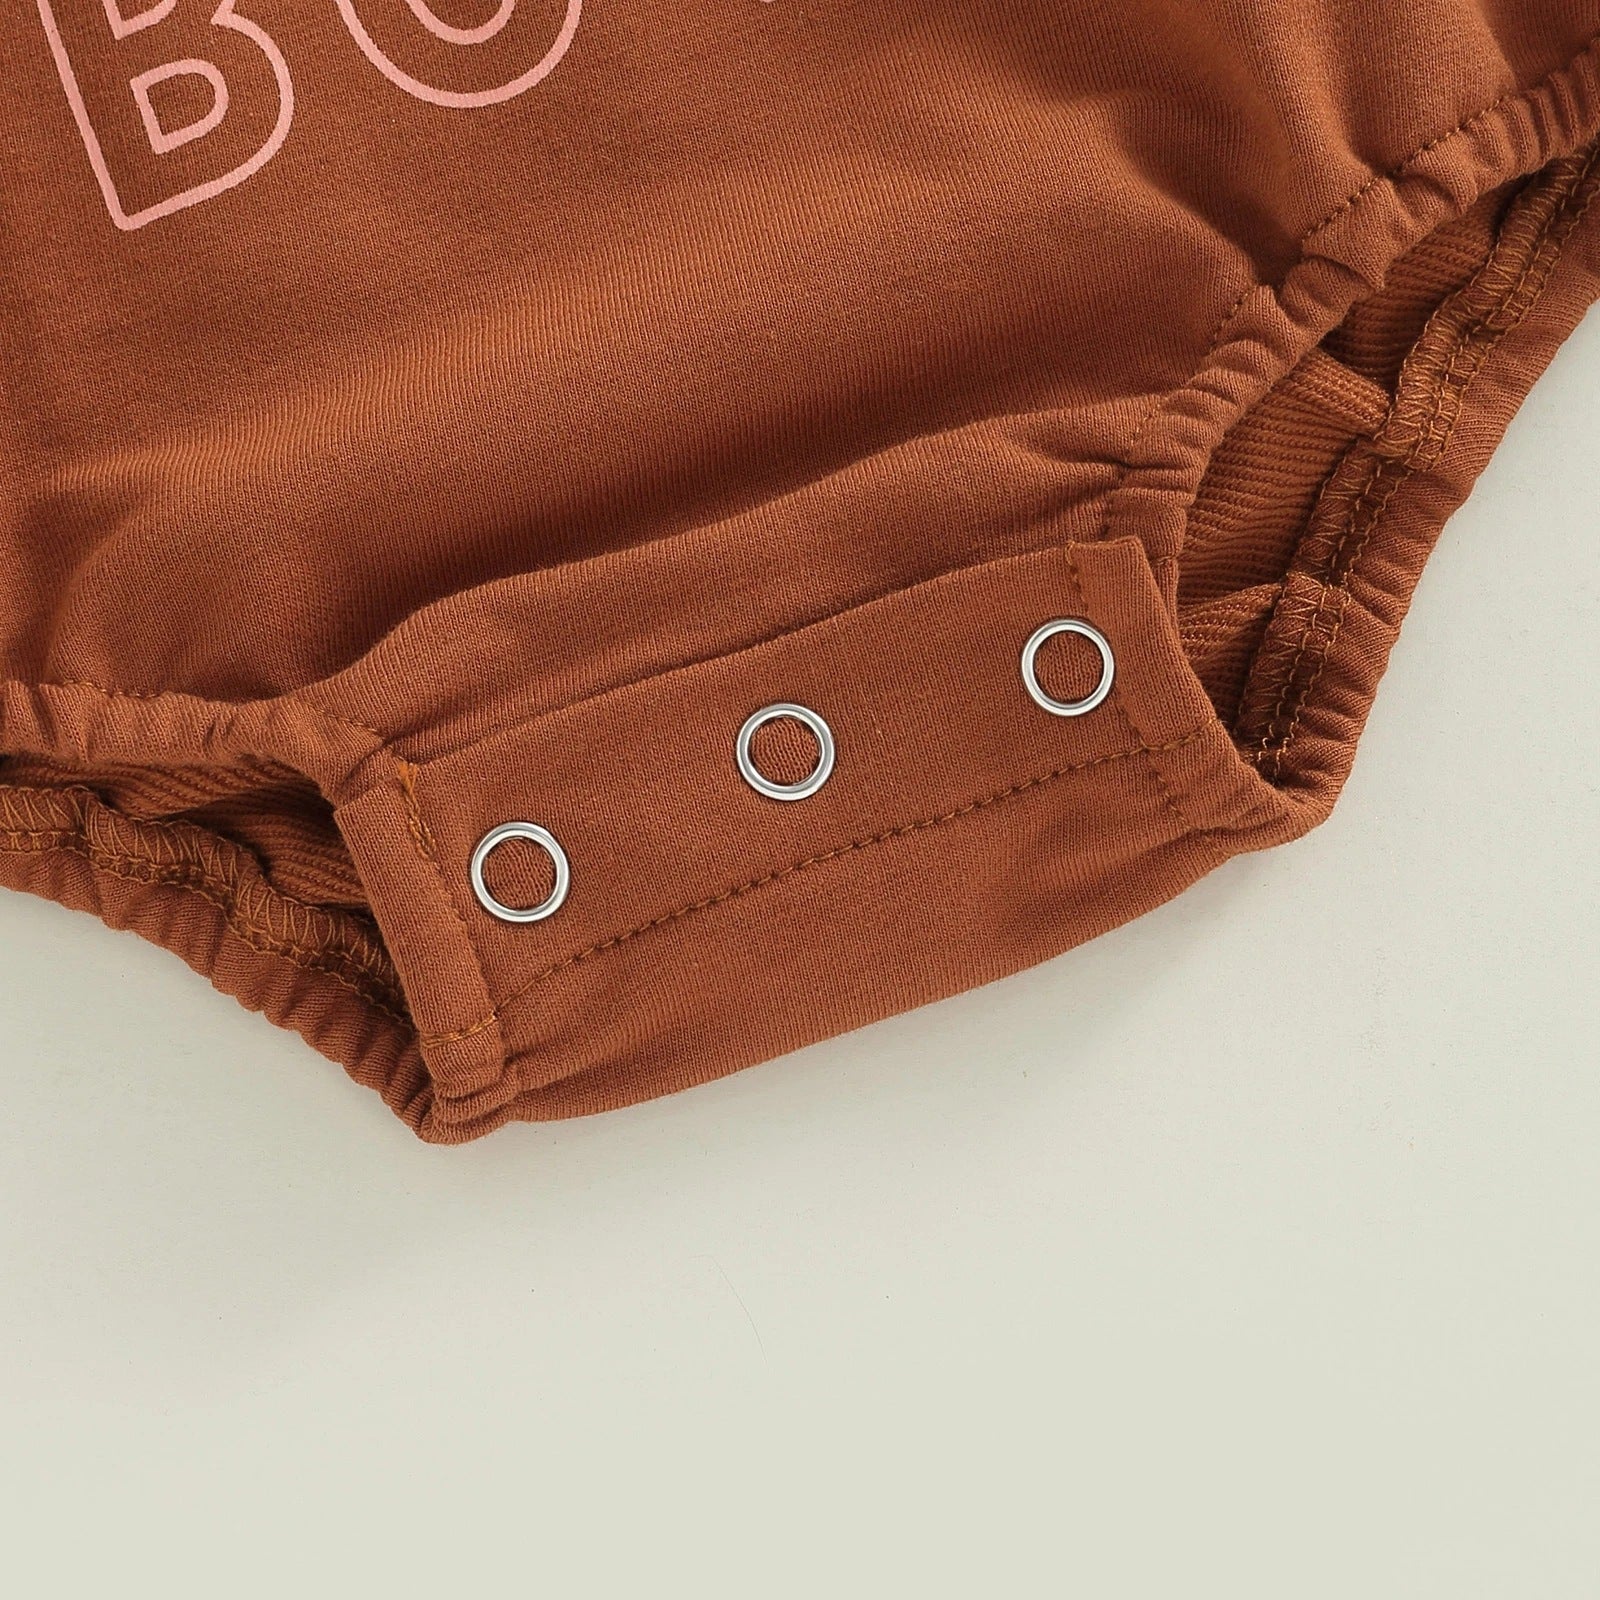 Add Style and Comfort to Your Child's Wardrobe with Our Brown Lettering Printed Romper